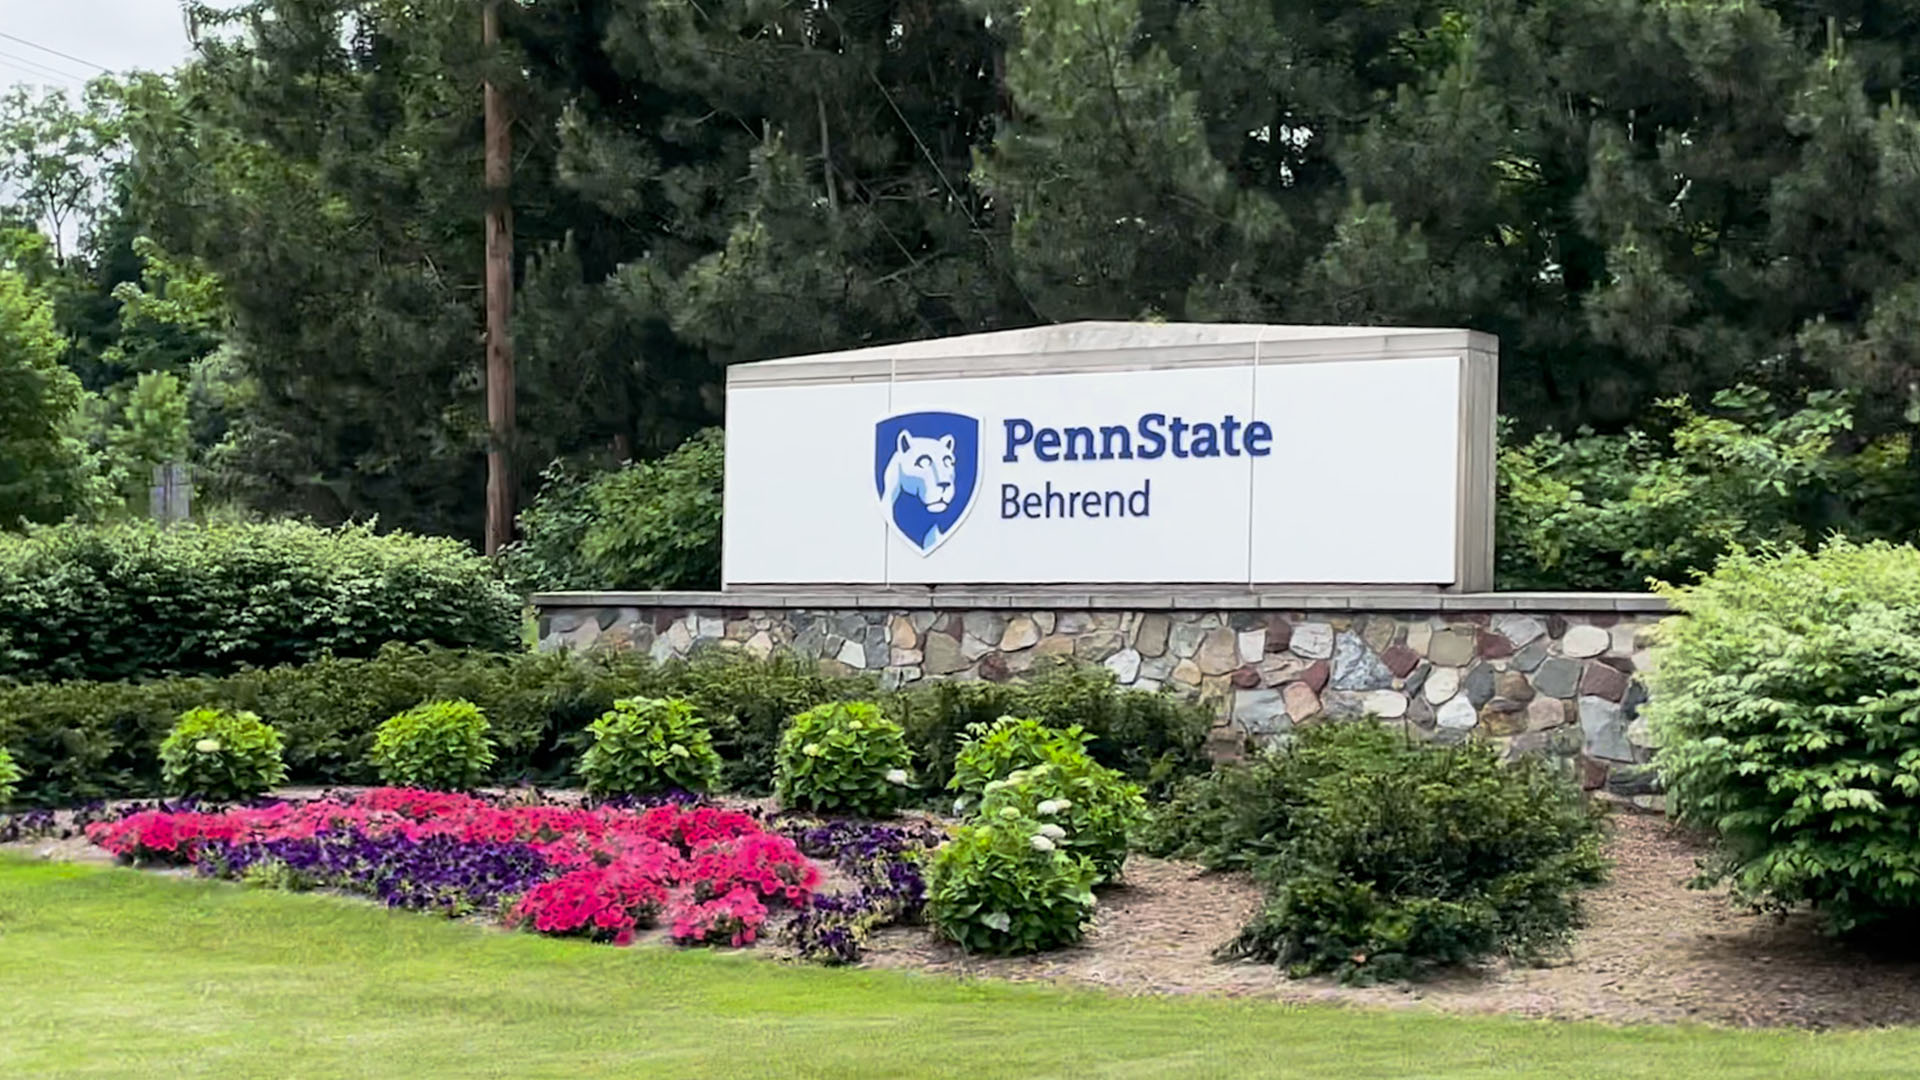 About Penn State Behrend